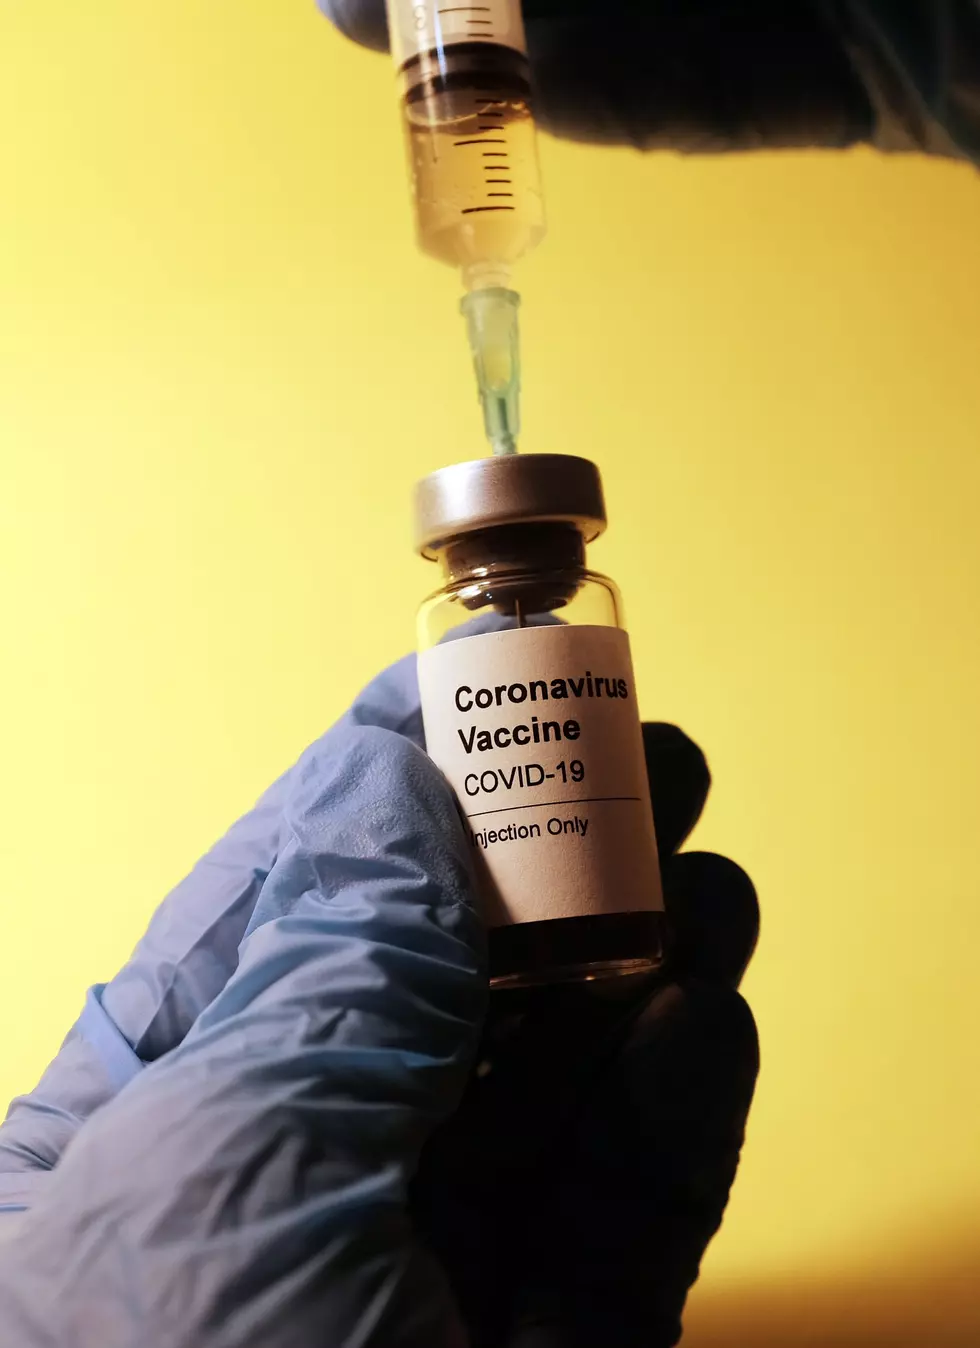 COVID-19 Vaccine Appointments Now Available for Connecticut Residents Ages 65 to 74